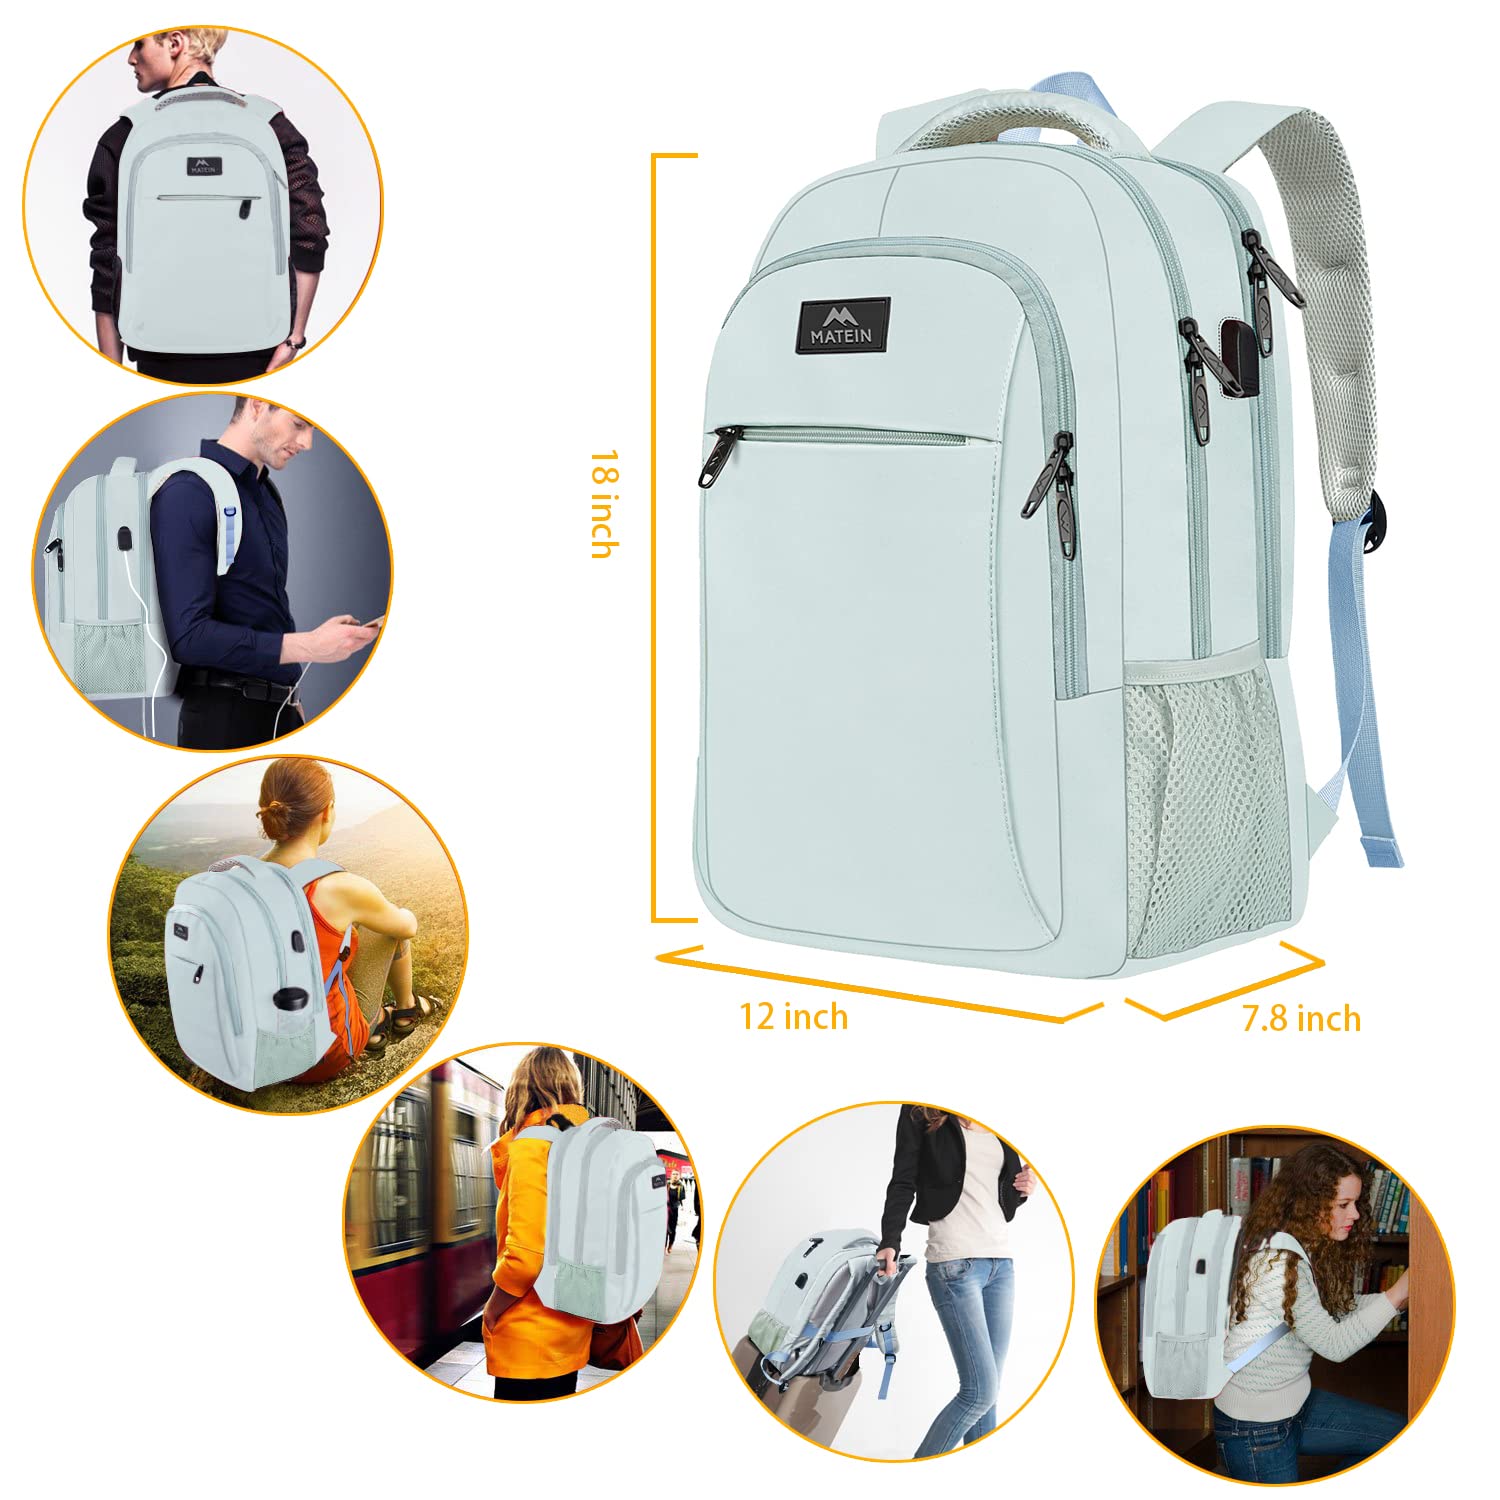 Travel Laptop Backpack, Lightweight Anti Theft College Backpack with USB Charging Port, Water Resistant Slim Travel Laptop Bag Fit 15.6 Inch Computer Durable Casual Daypack Backpack Gift for Women Men